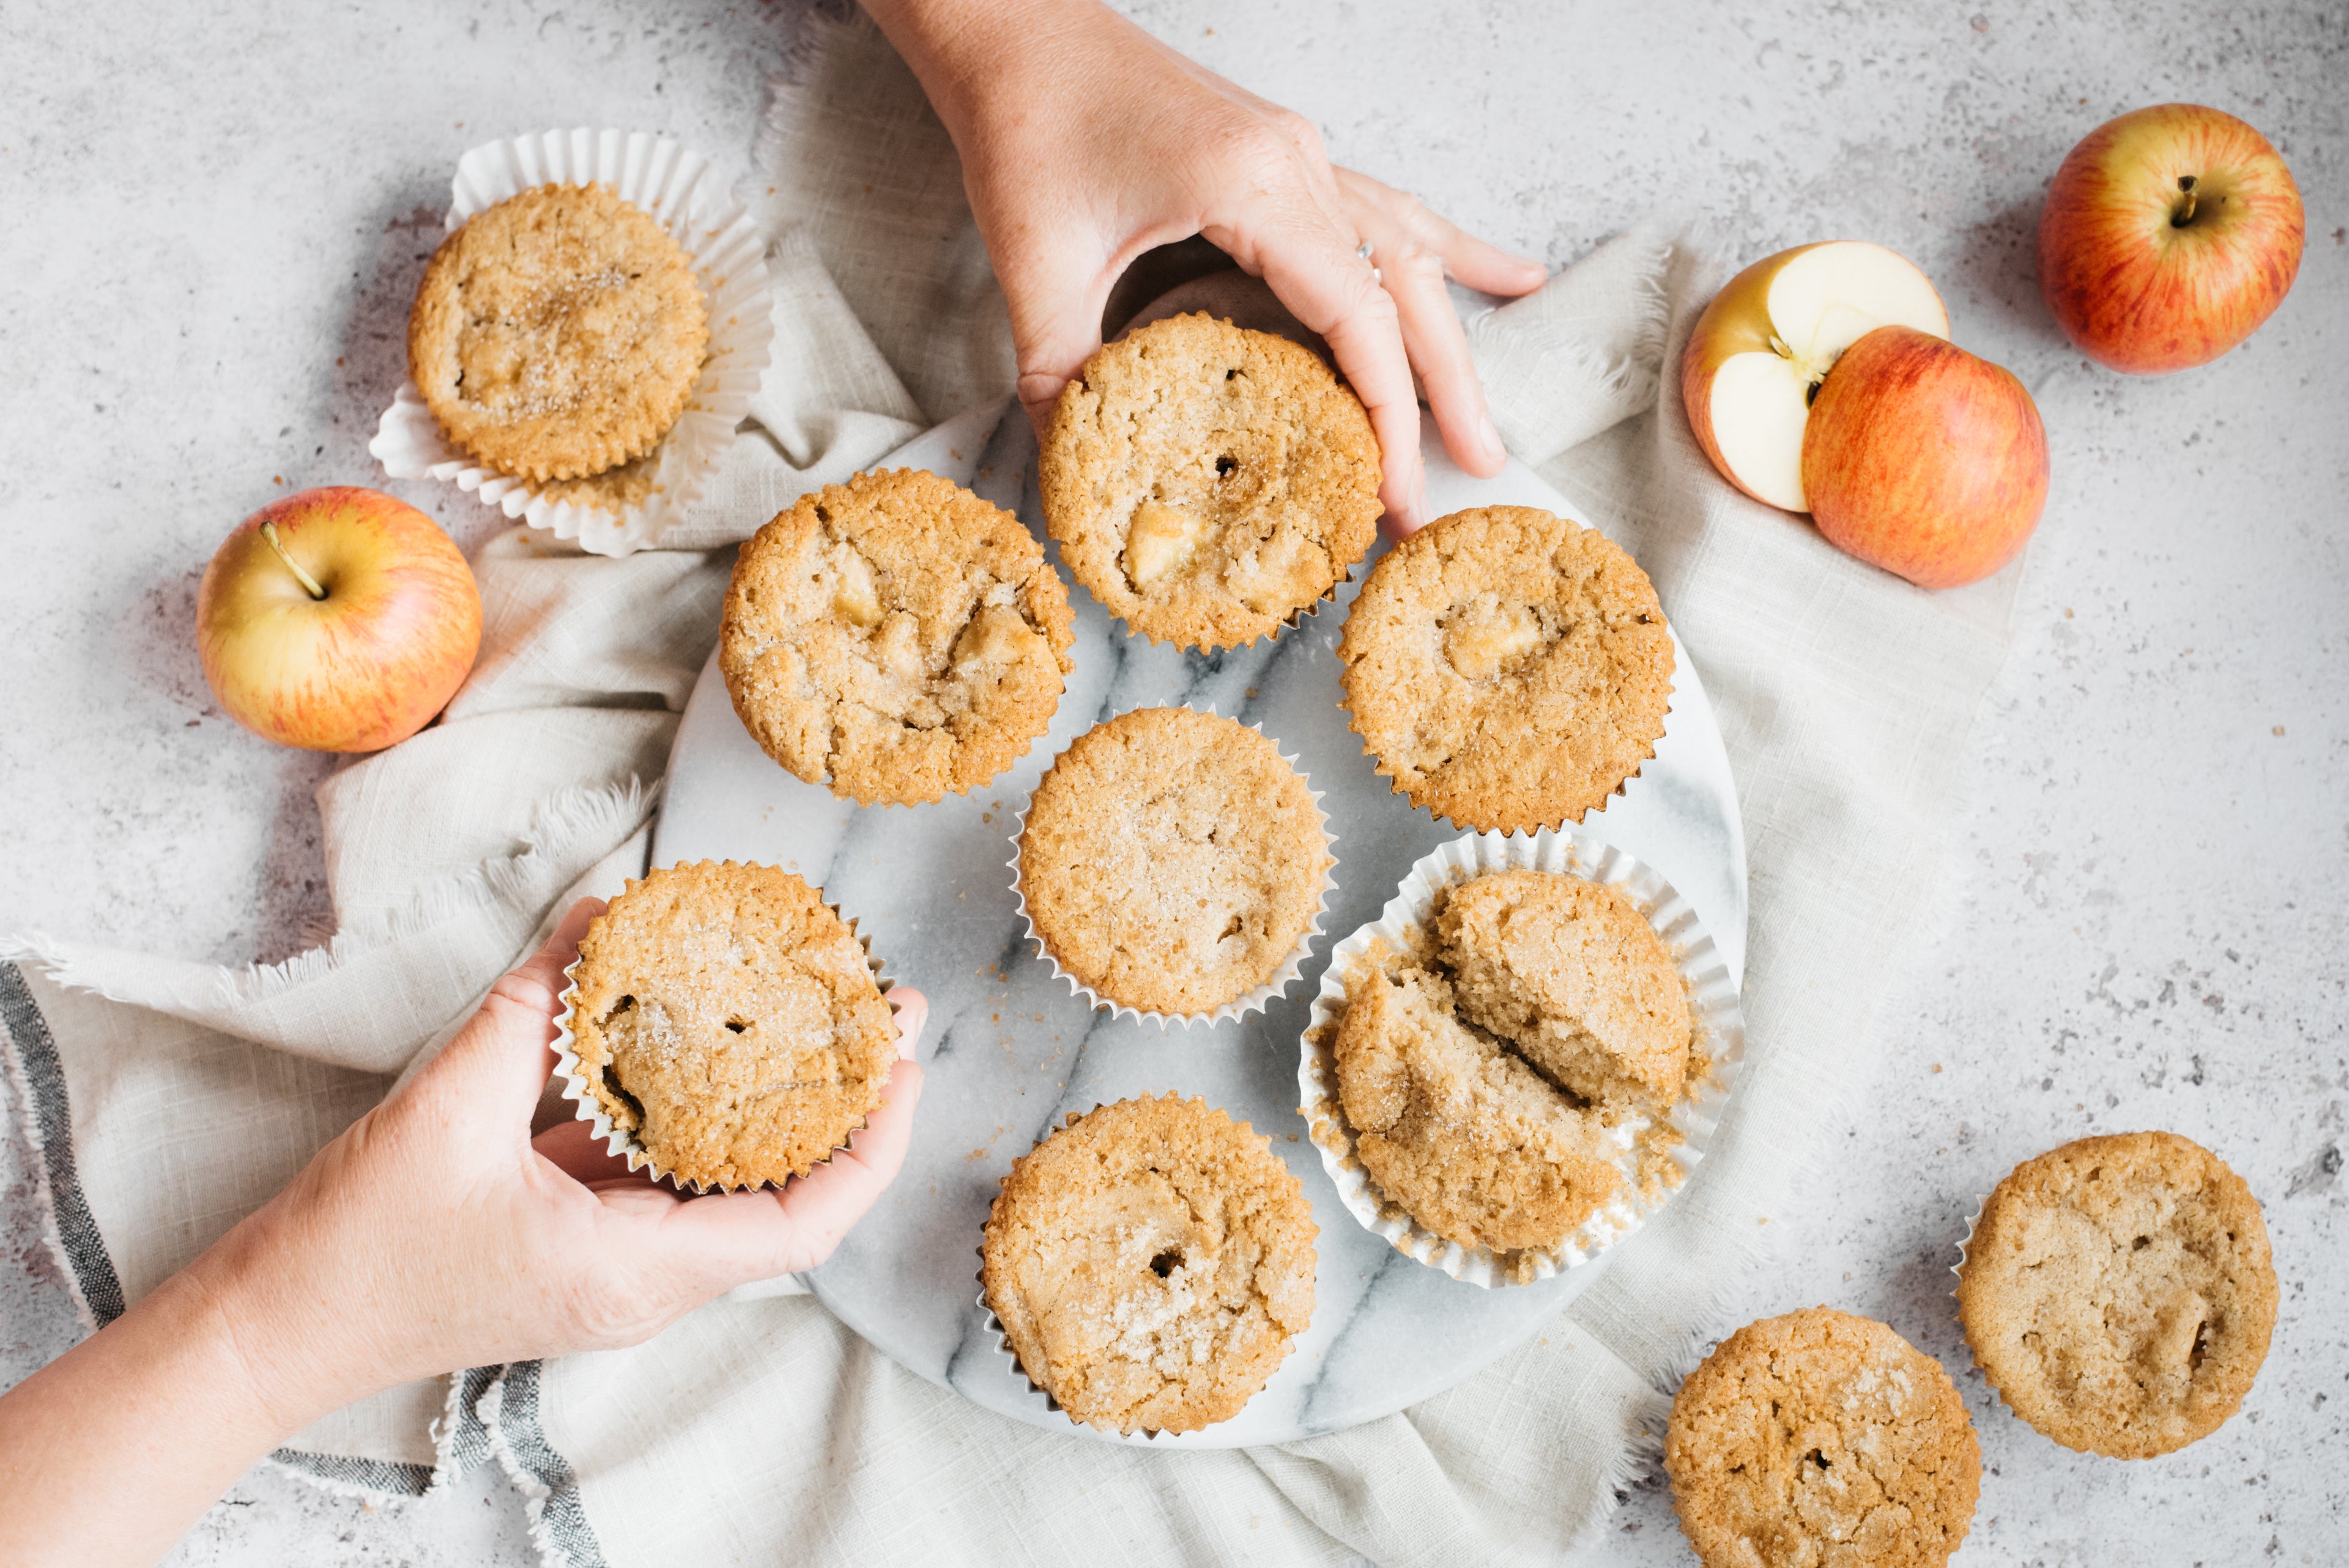 Hands reaching in to grab a plate of muffins with apples beside